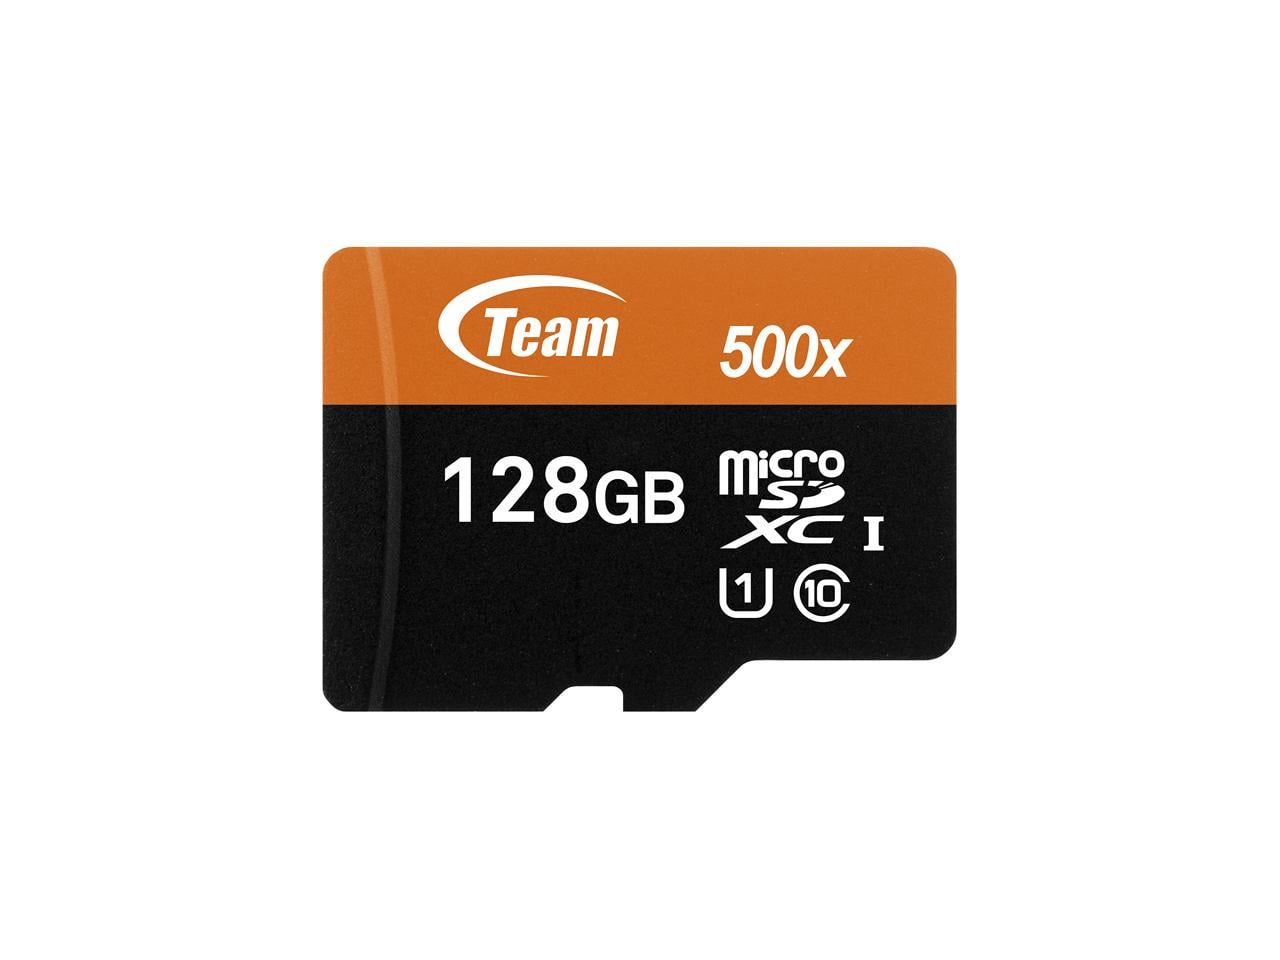 Includes Standard SD Adapter. Professional Ultra SanDisk 128GB verified for Xiaomi Mi A3 MicroSDXC card with CUSTOM Hi-Speed UHS-1 A1 Class 10 Certified 100MB/s Lossless Format 